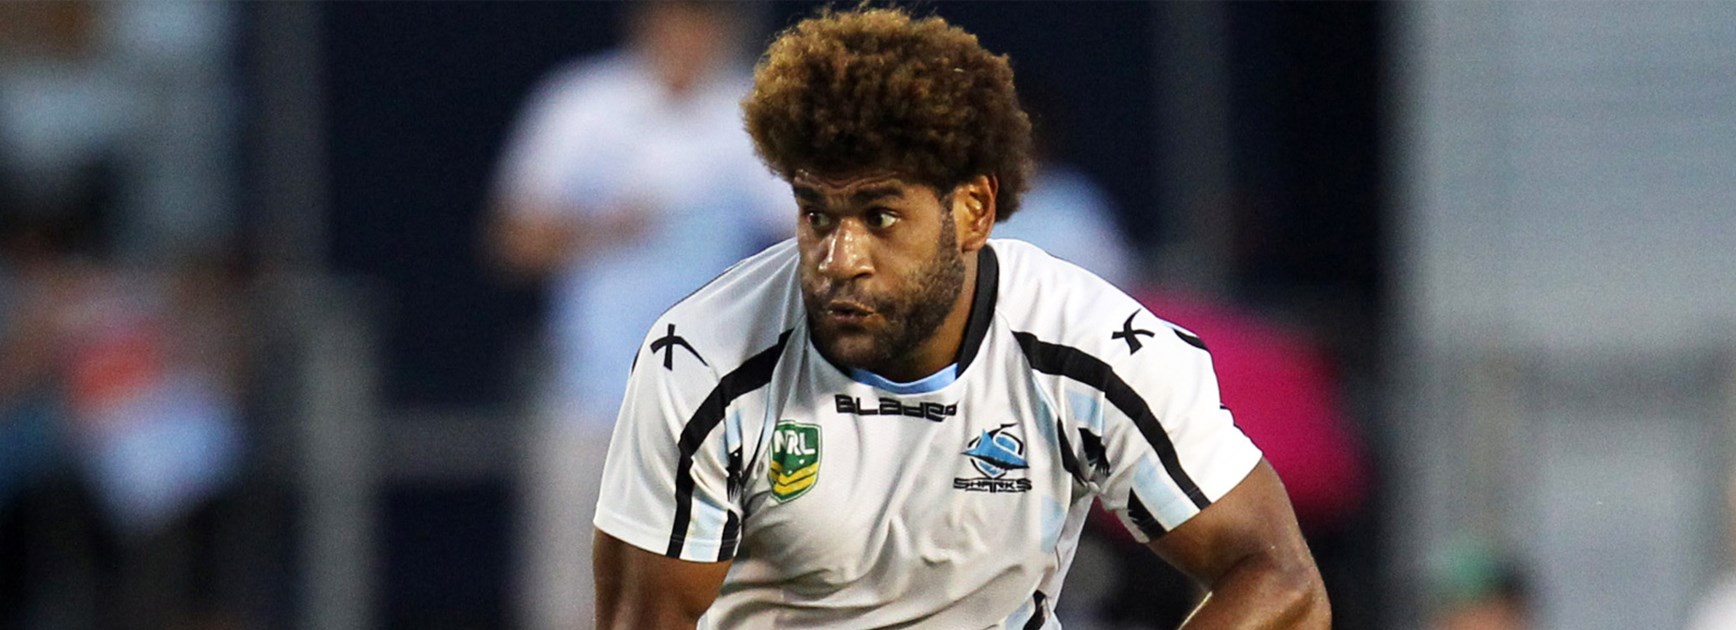 Junior Roqica has started an NRL charity auction to help raise funds for Fiji following Tropical Cyclone Winston.